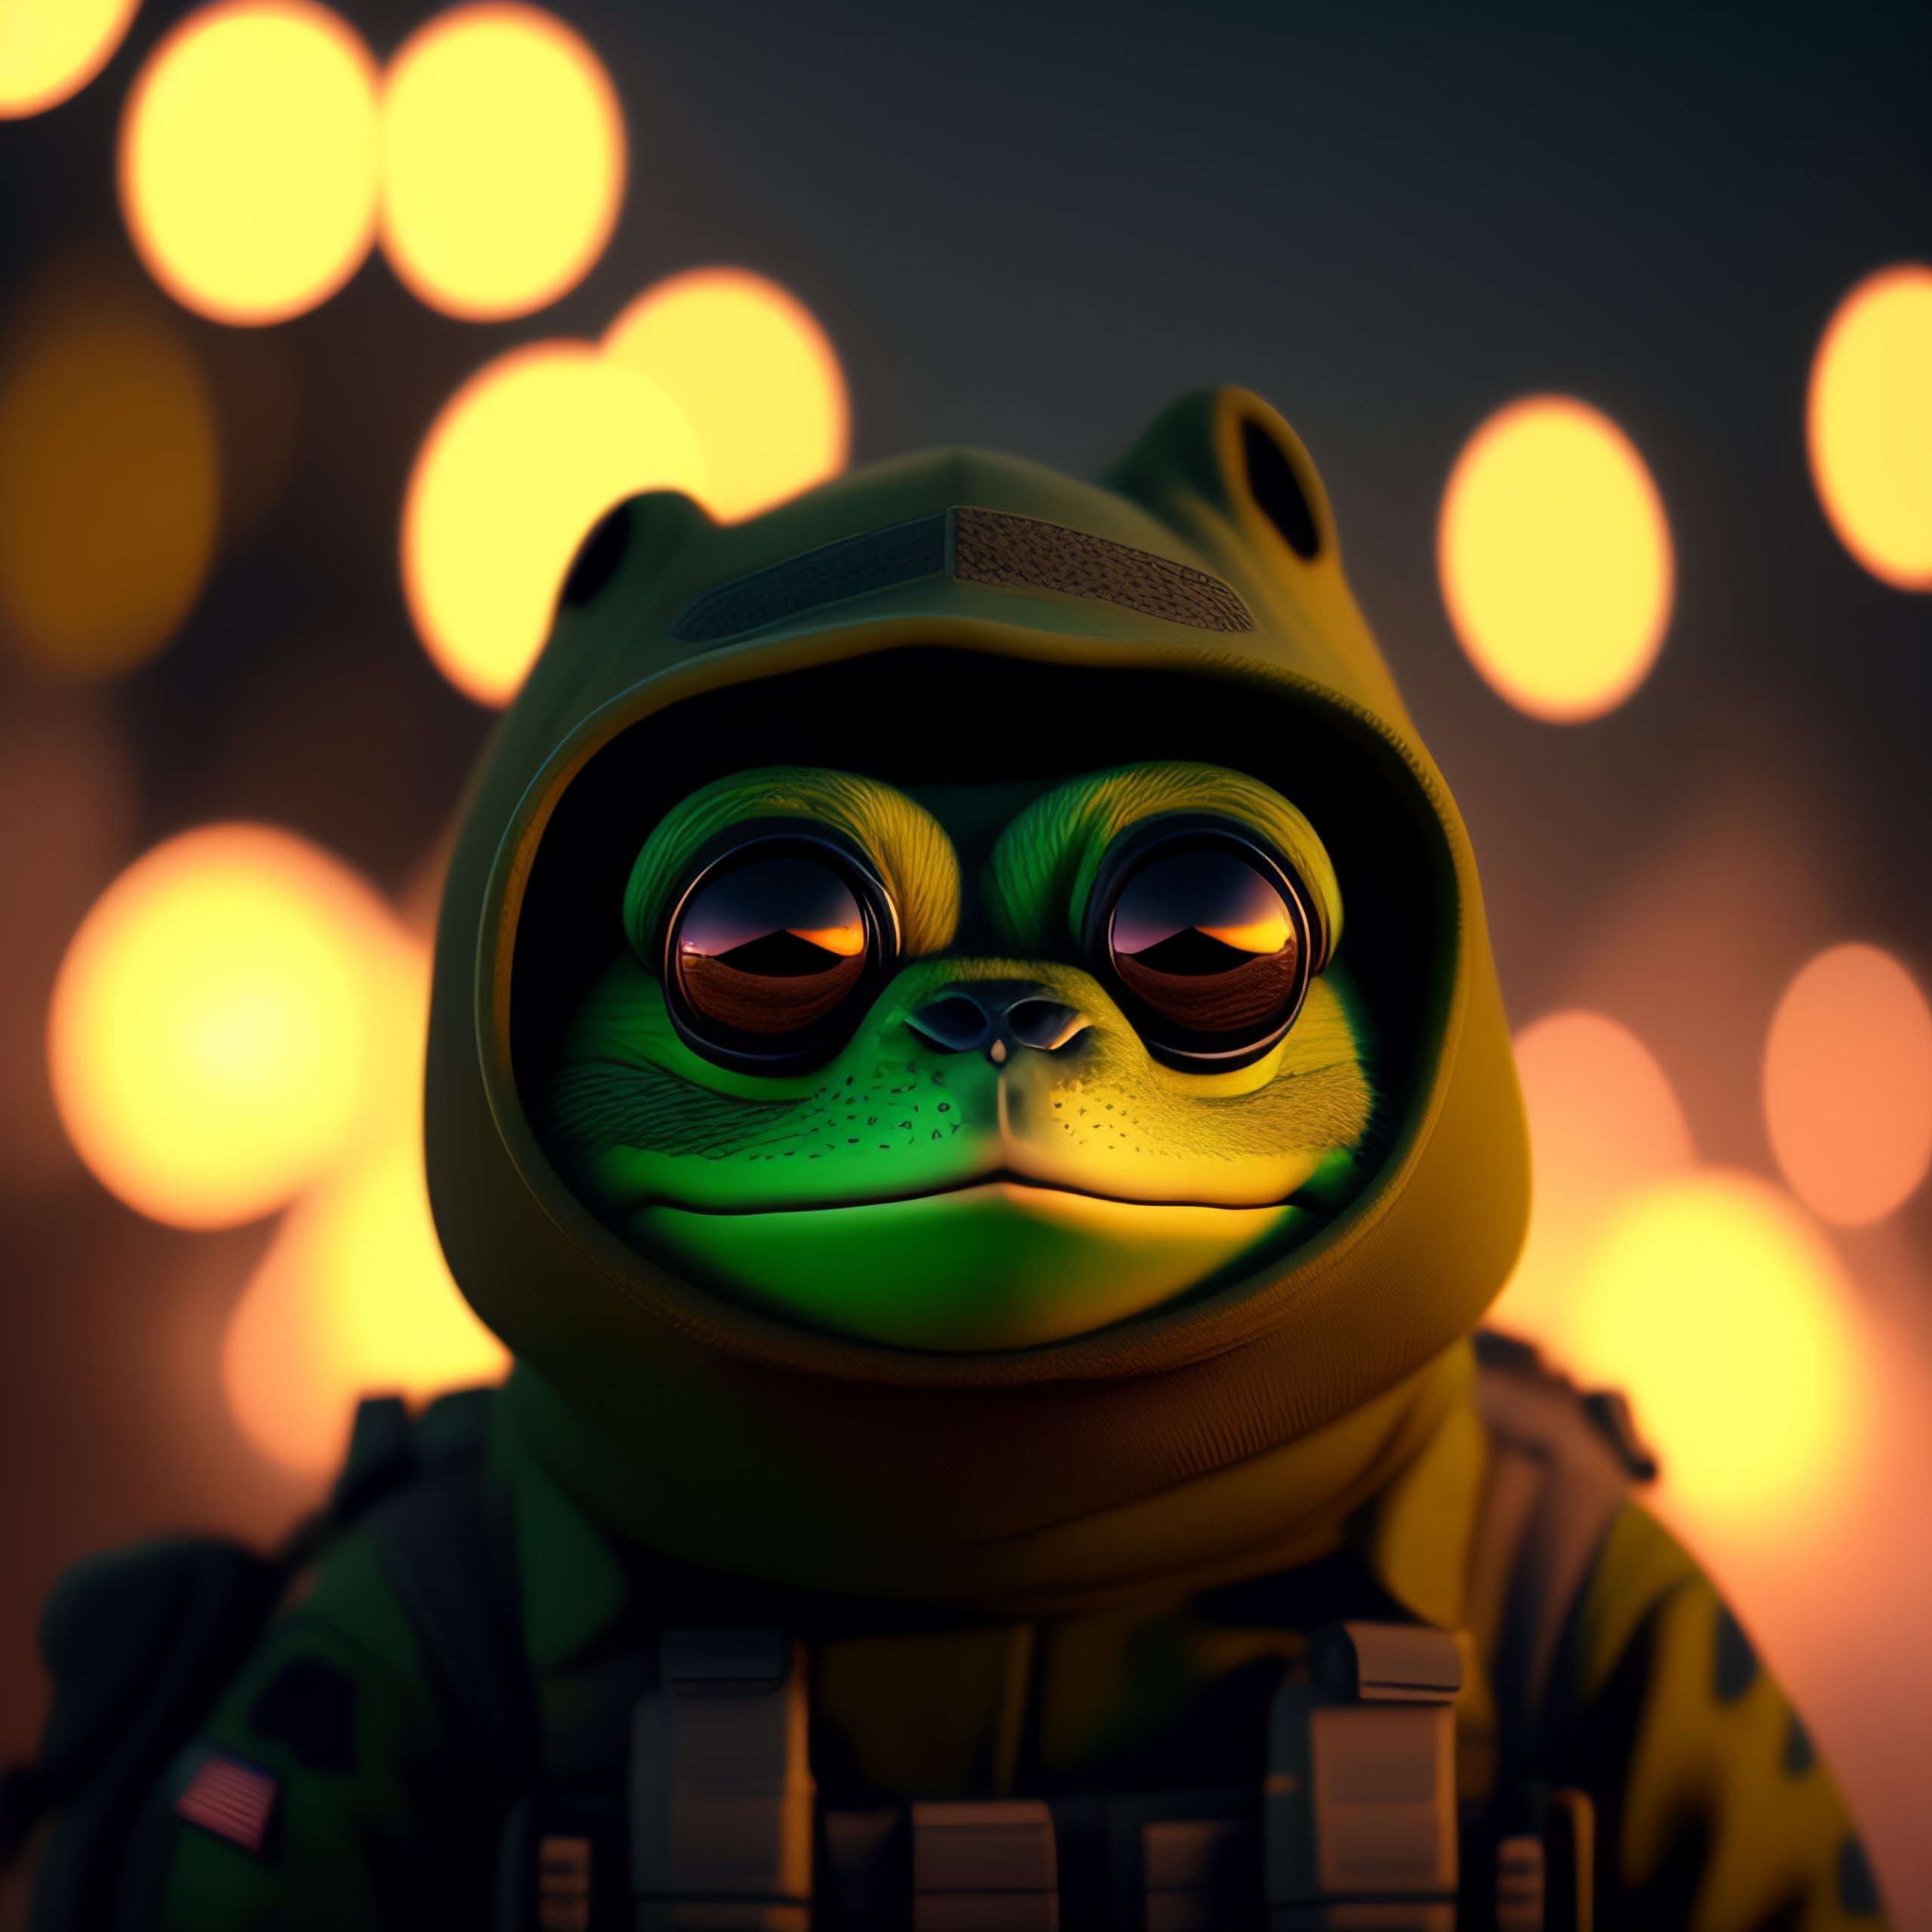 Lexica - Pepe the frog in the army at night, key lighting, soft lights ...